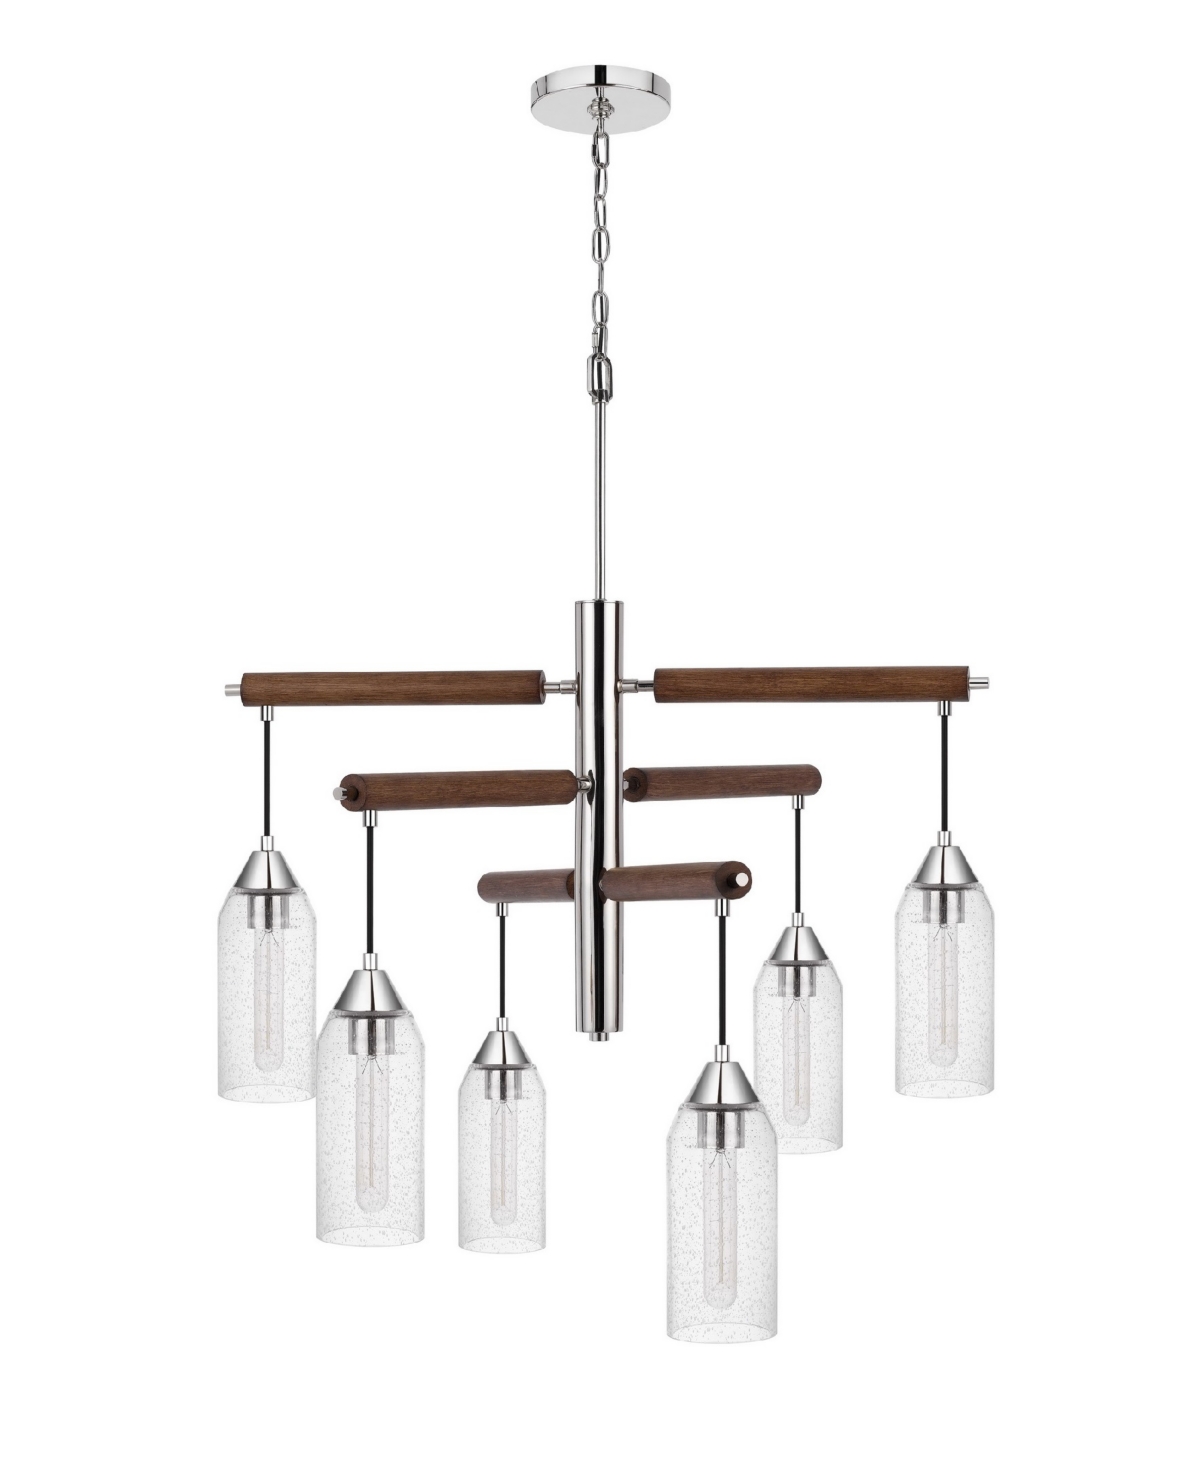 Cal Lighting 38" Height Metal And Wood Accents Chandelier In Chrome,wood